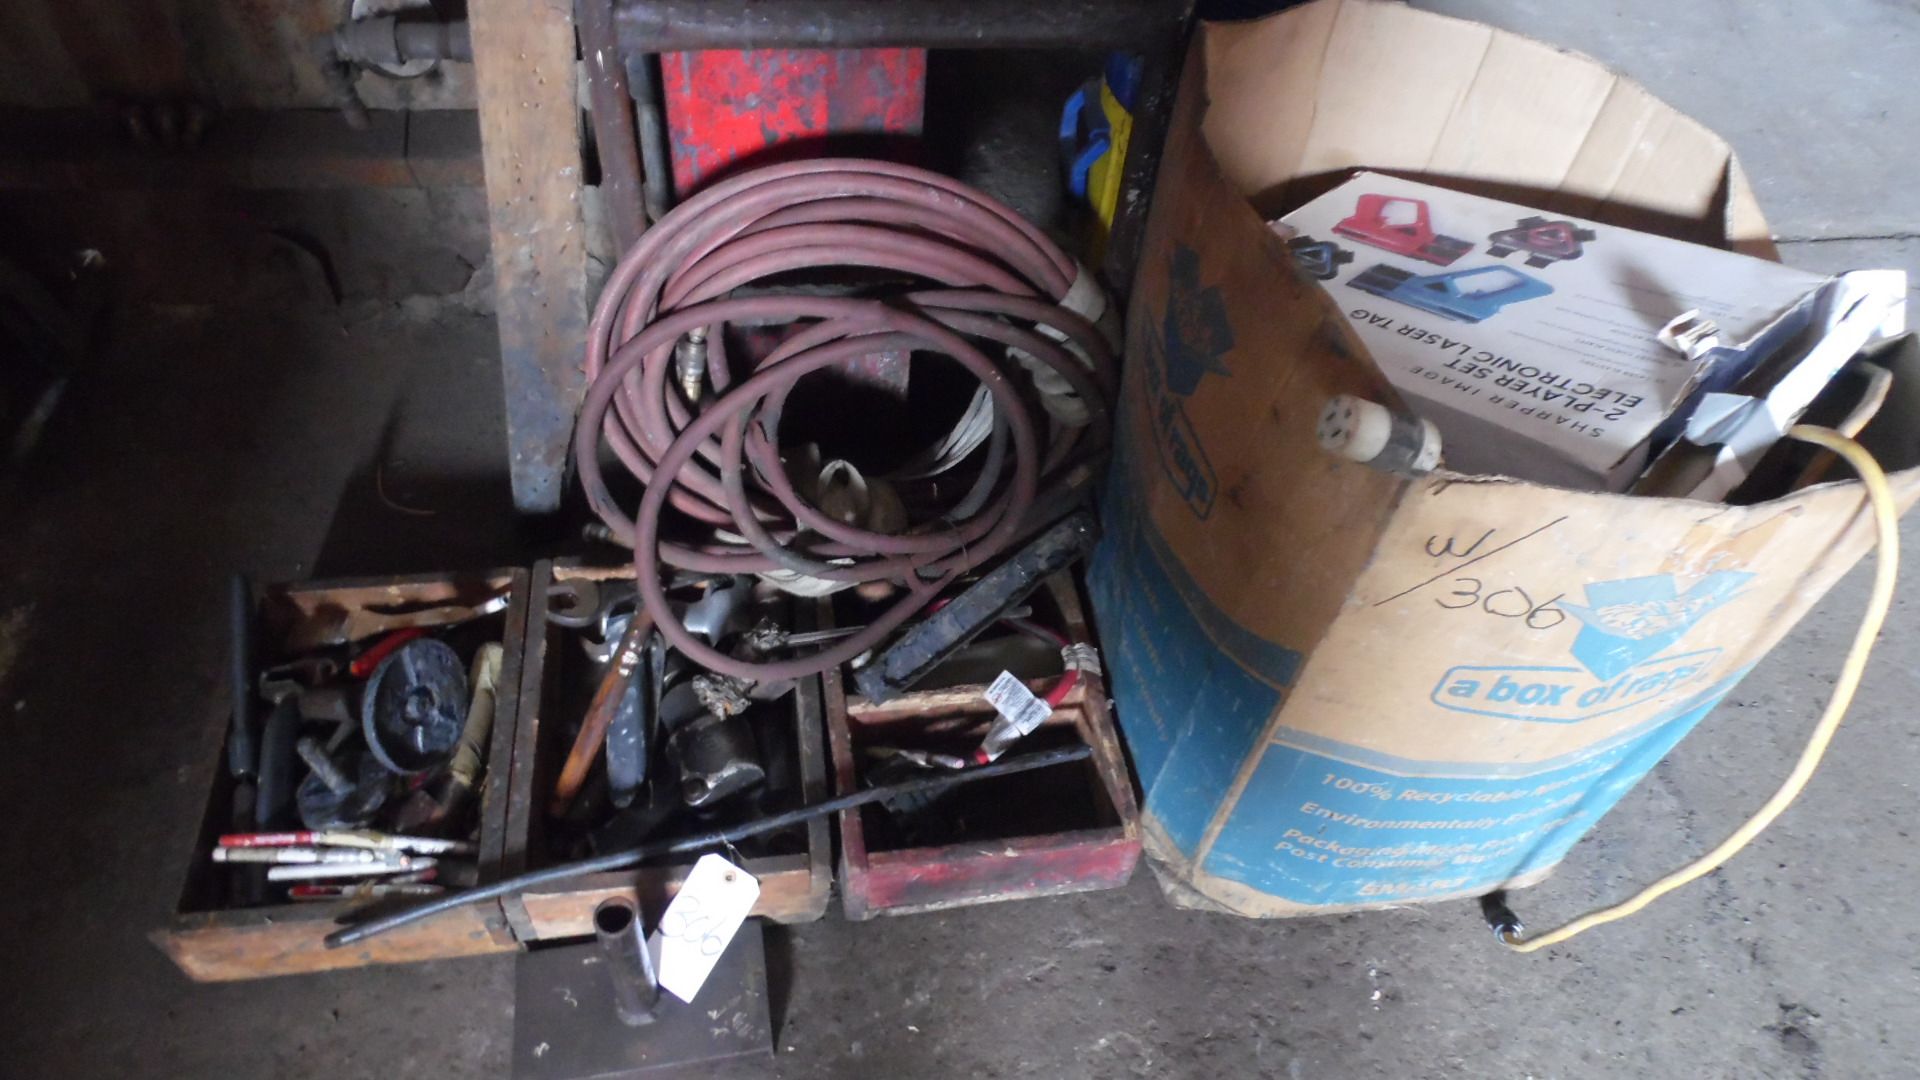 EXTENSION CORDS / MISC. TOOLS